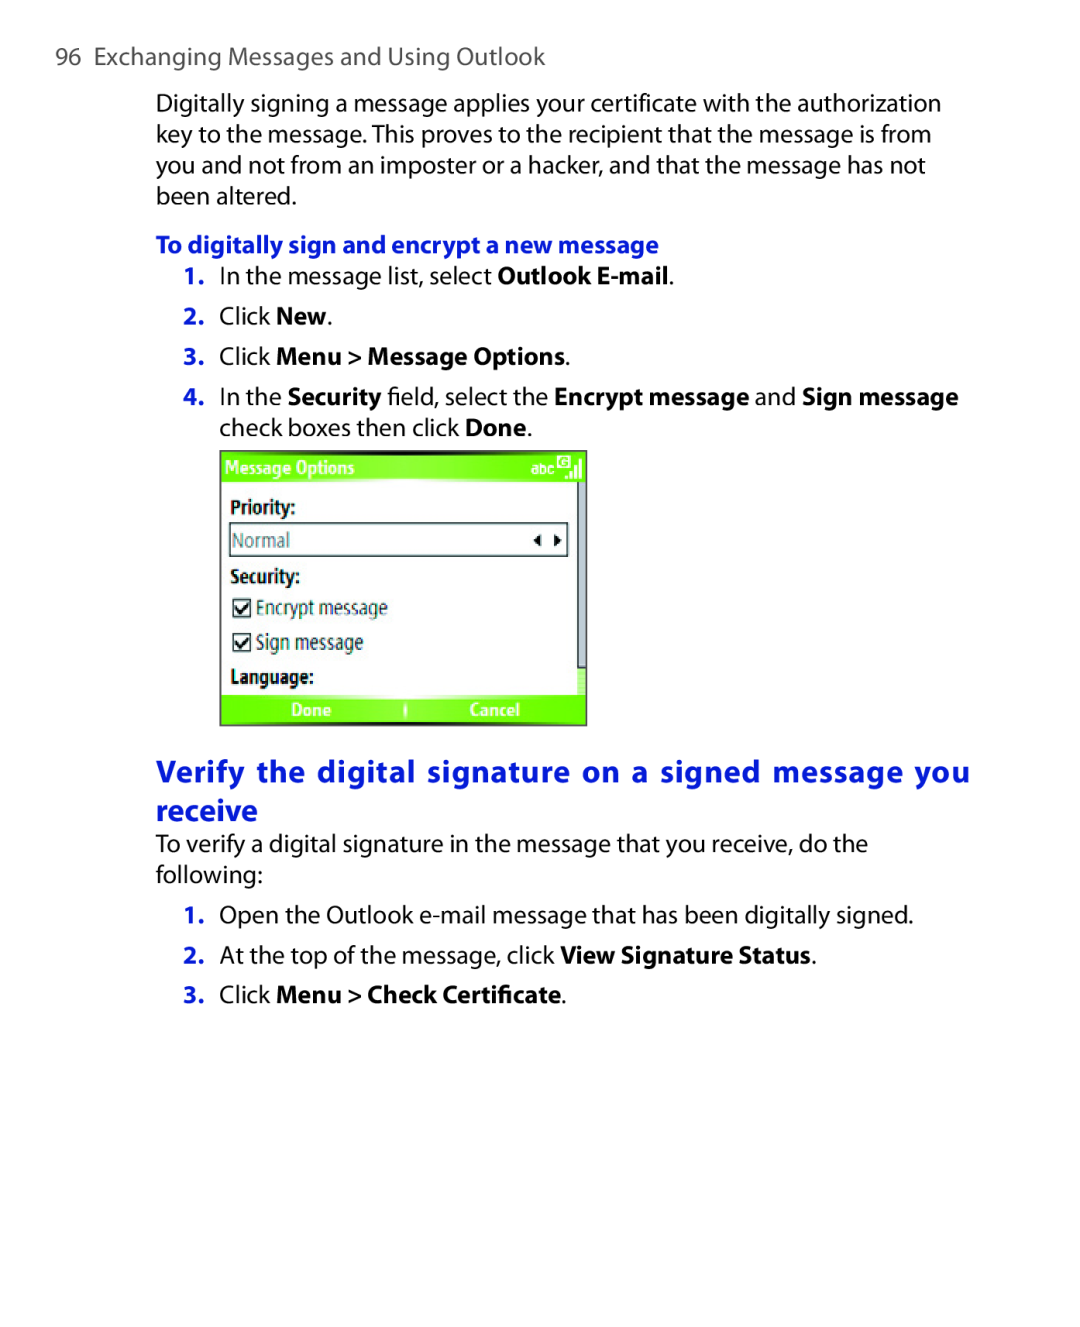 HTC HTC S621 Verify the digital signature on a signed message you receive, Exchanging Messages and Using Outlook 